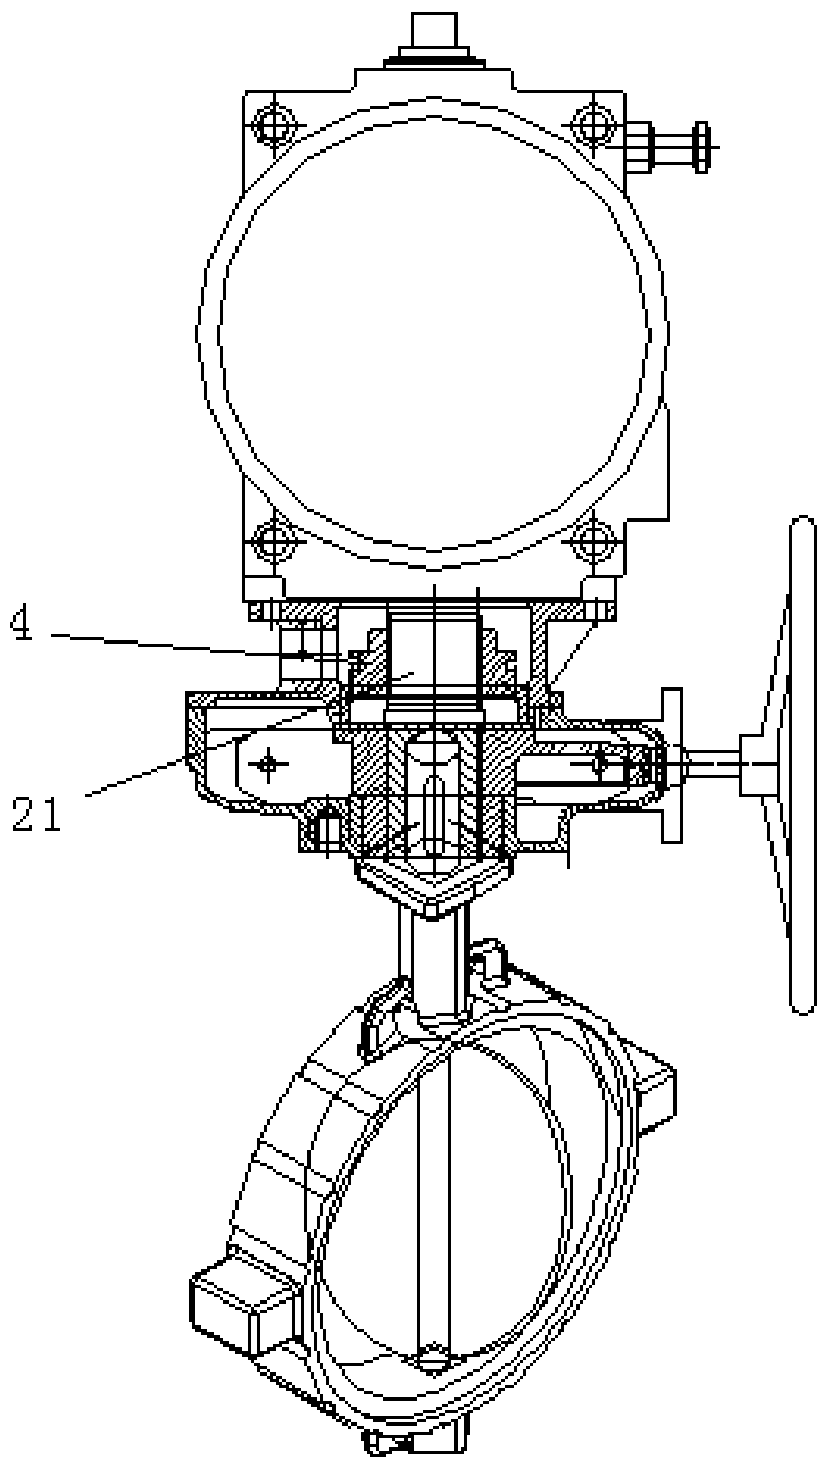 Manual and automatic clutch structure of pneumatic actuator